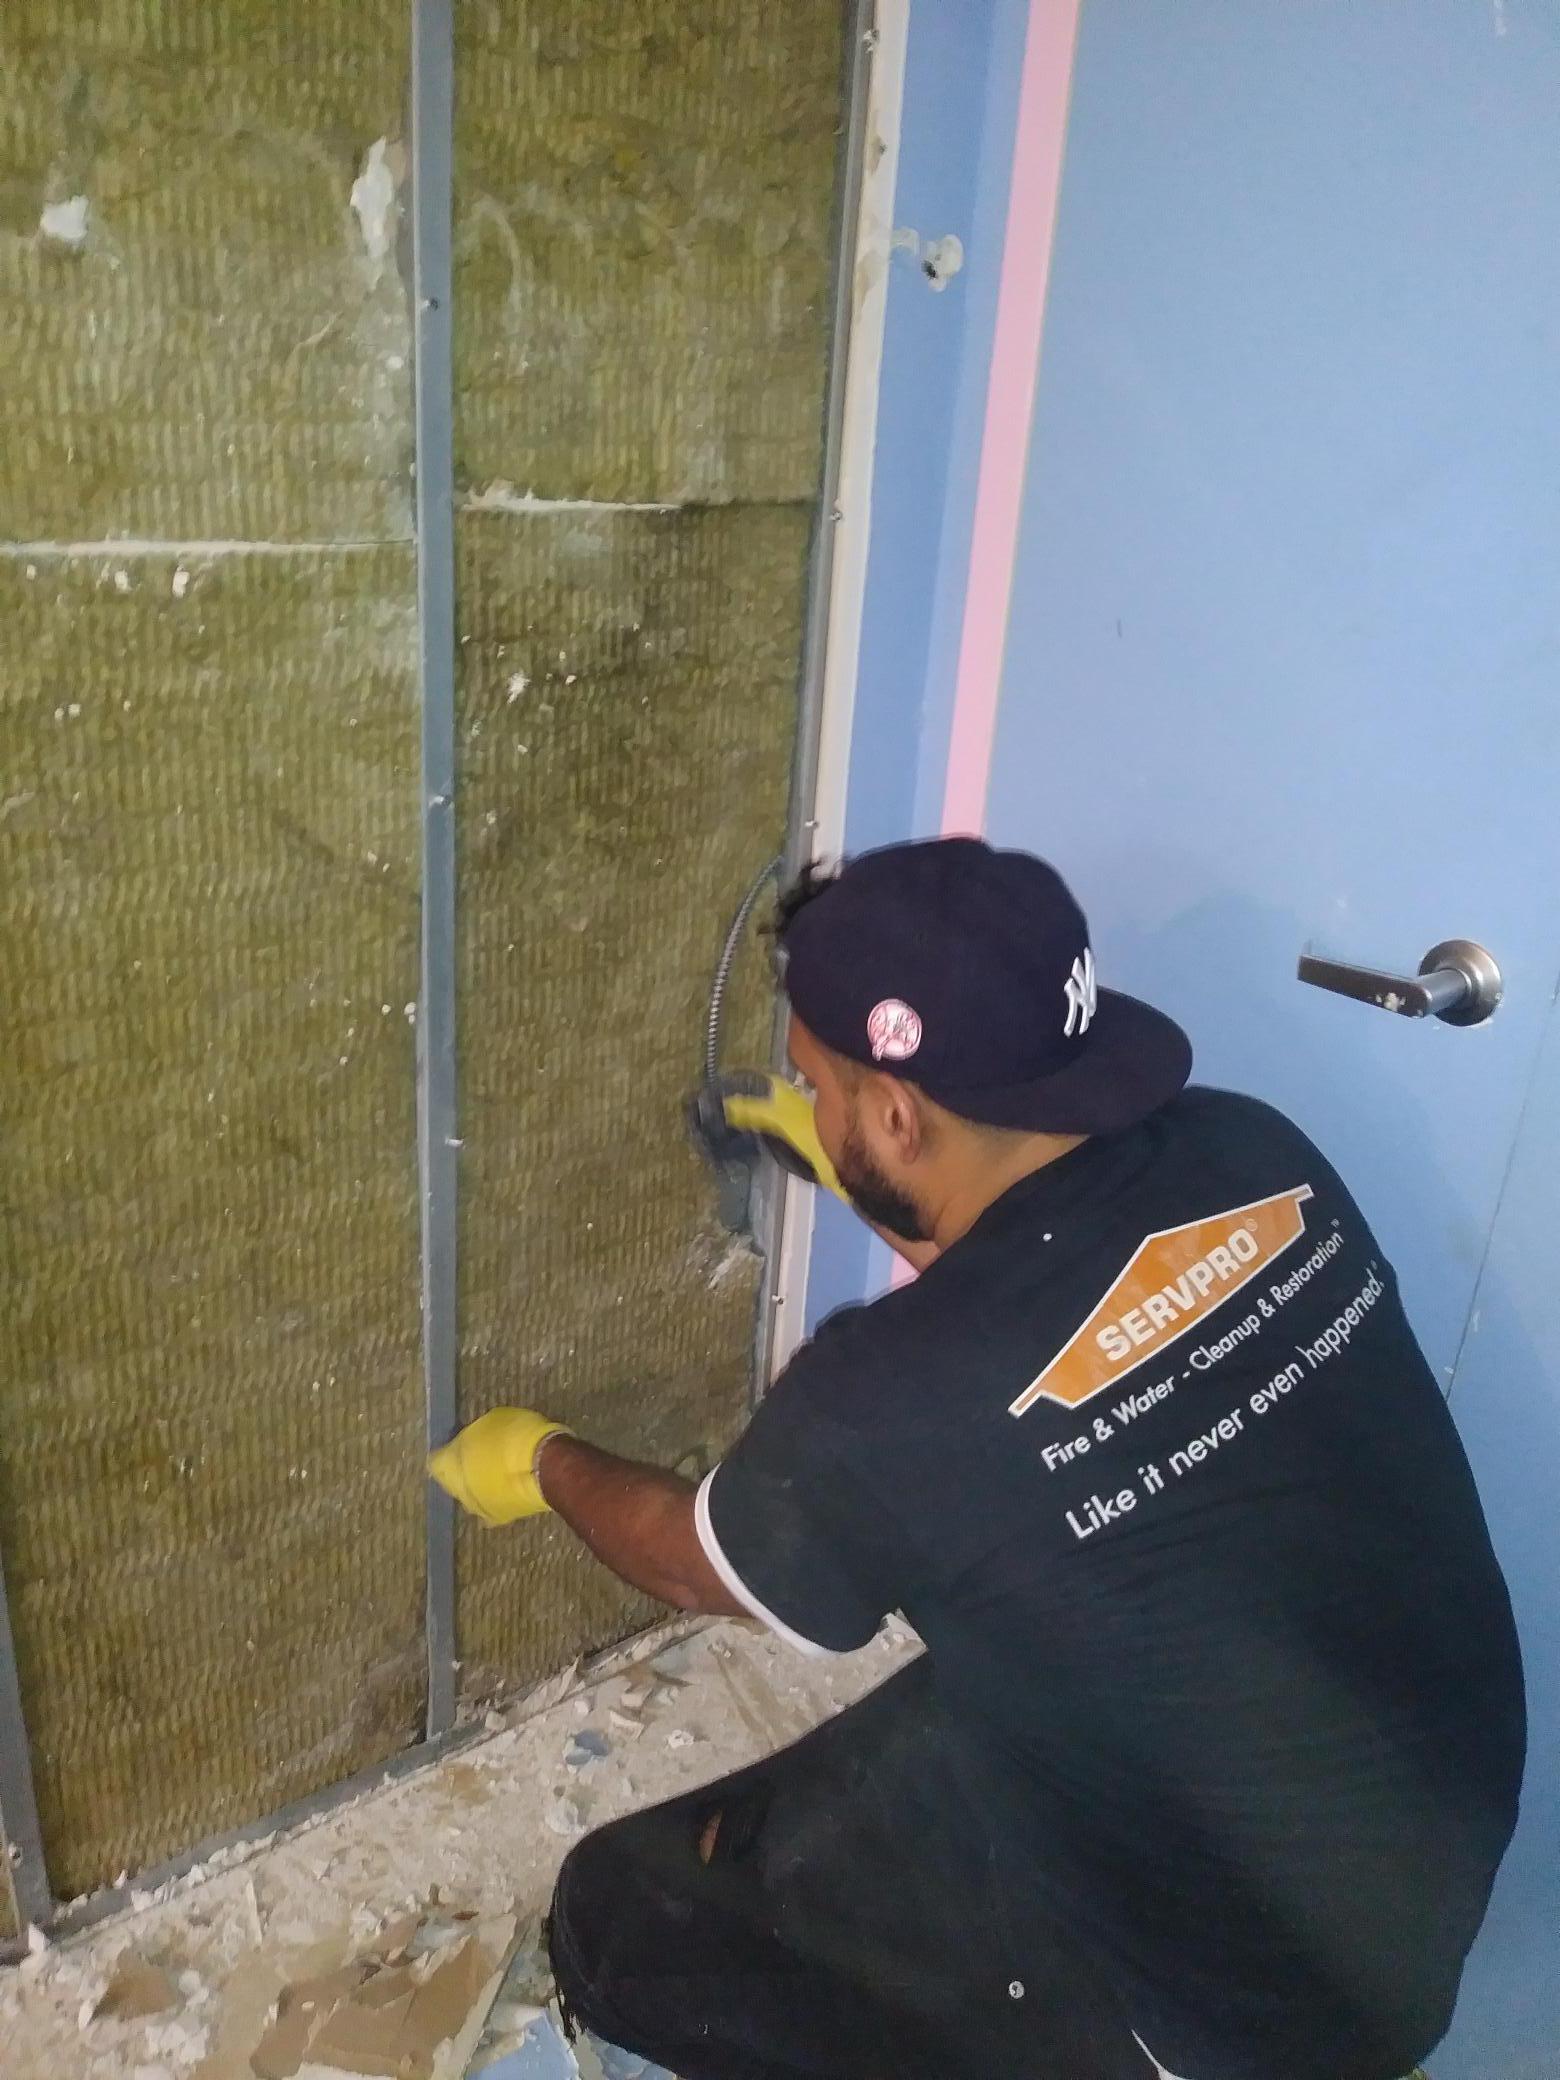 SERVPRO of Ozone Park/Jamaica Bay in action and working hard!